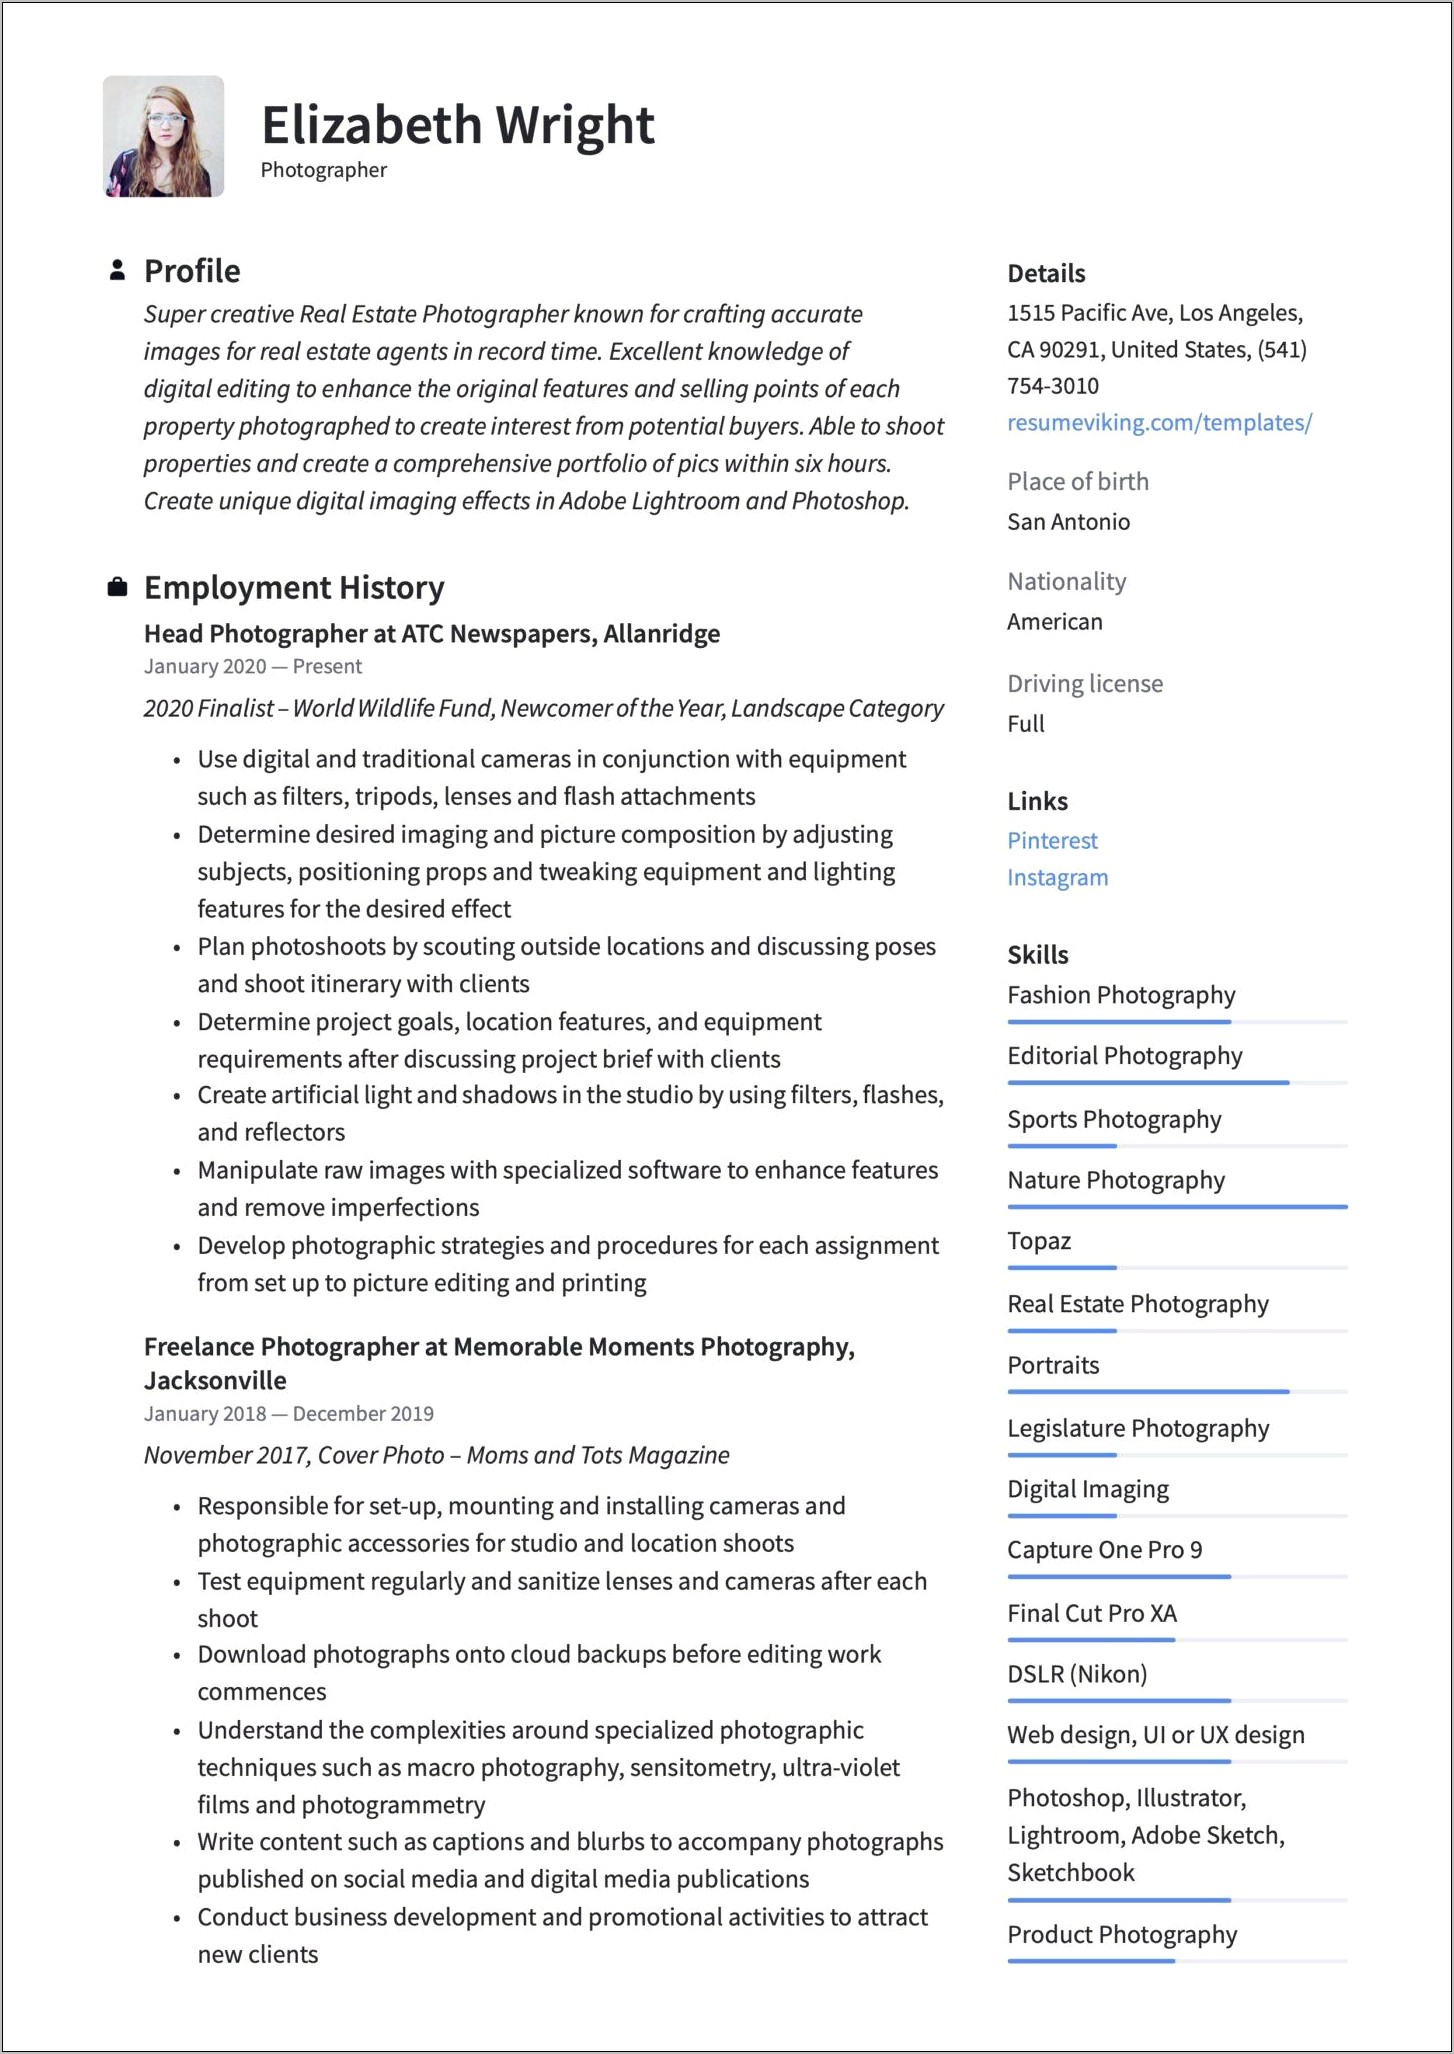 About Me Resume Examples Photographer